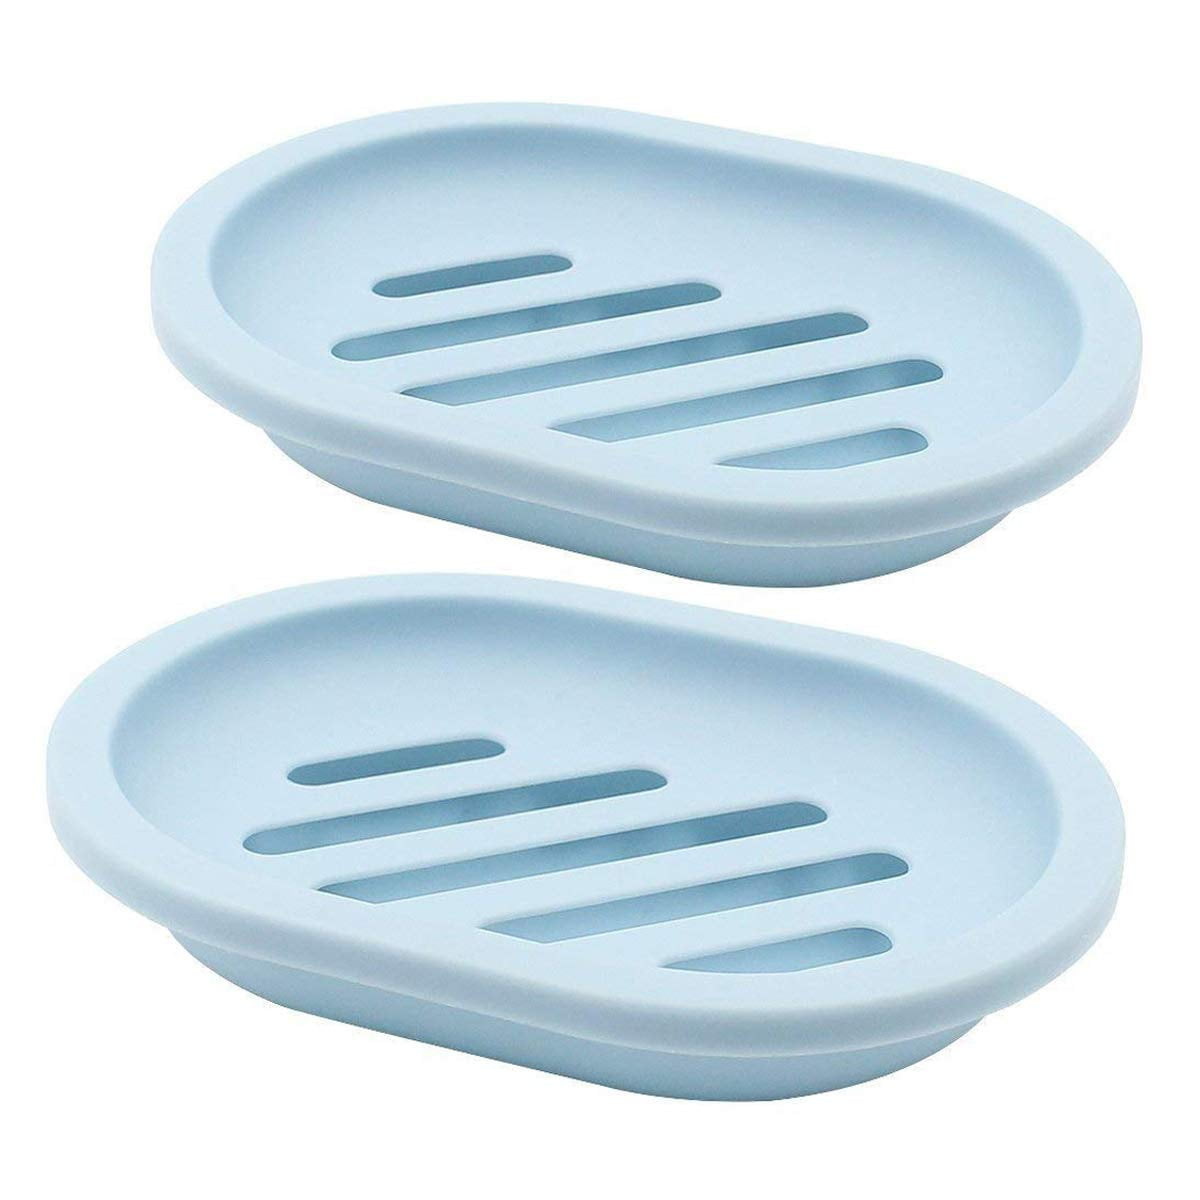 Water Dries Faster! Plastic Soap Dish Light Blue Soap Saver for Shower & Tubs 